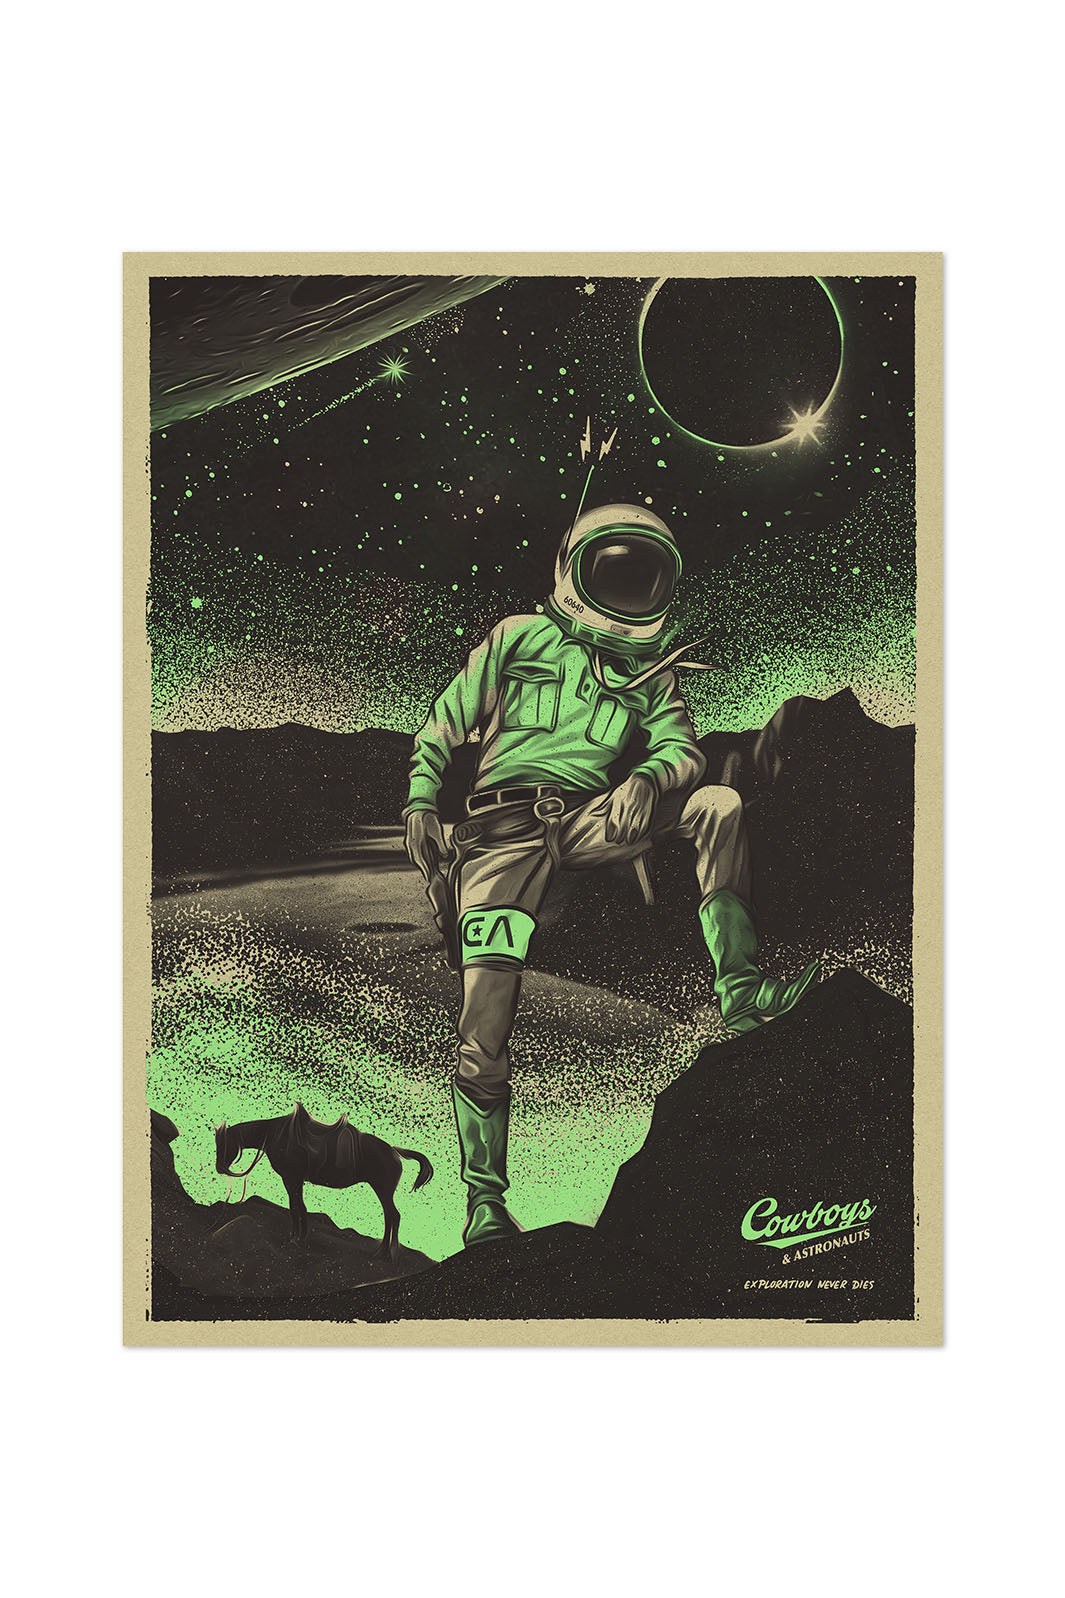 Annual Graphic Print 2019 - Cowboys and Astronauts x Rocks & Woods Co.